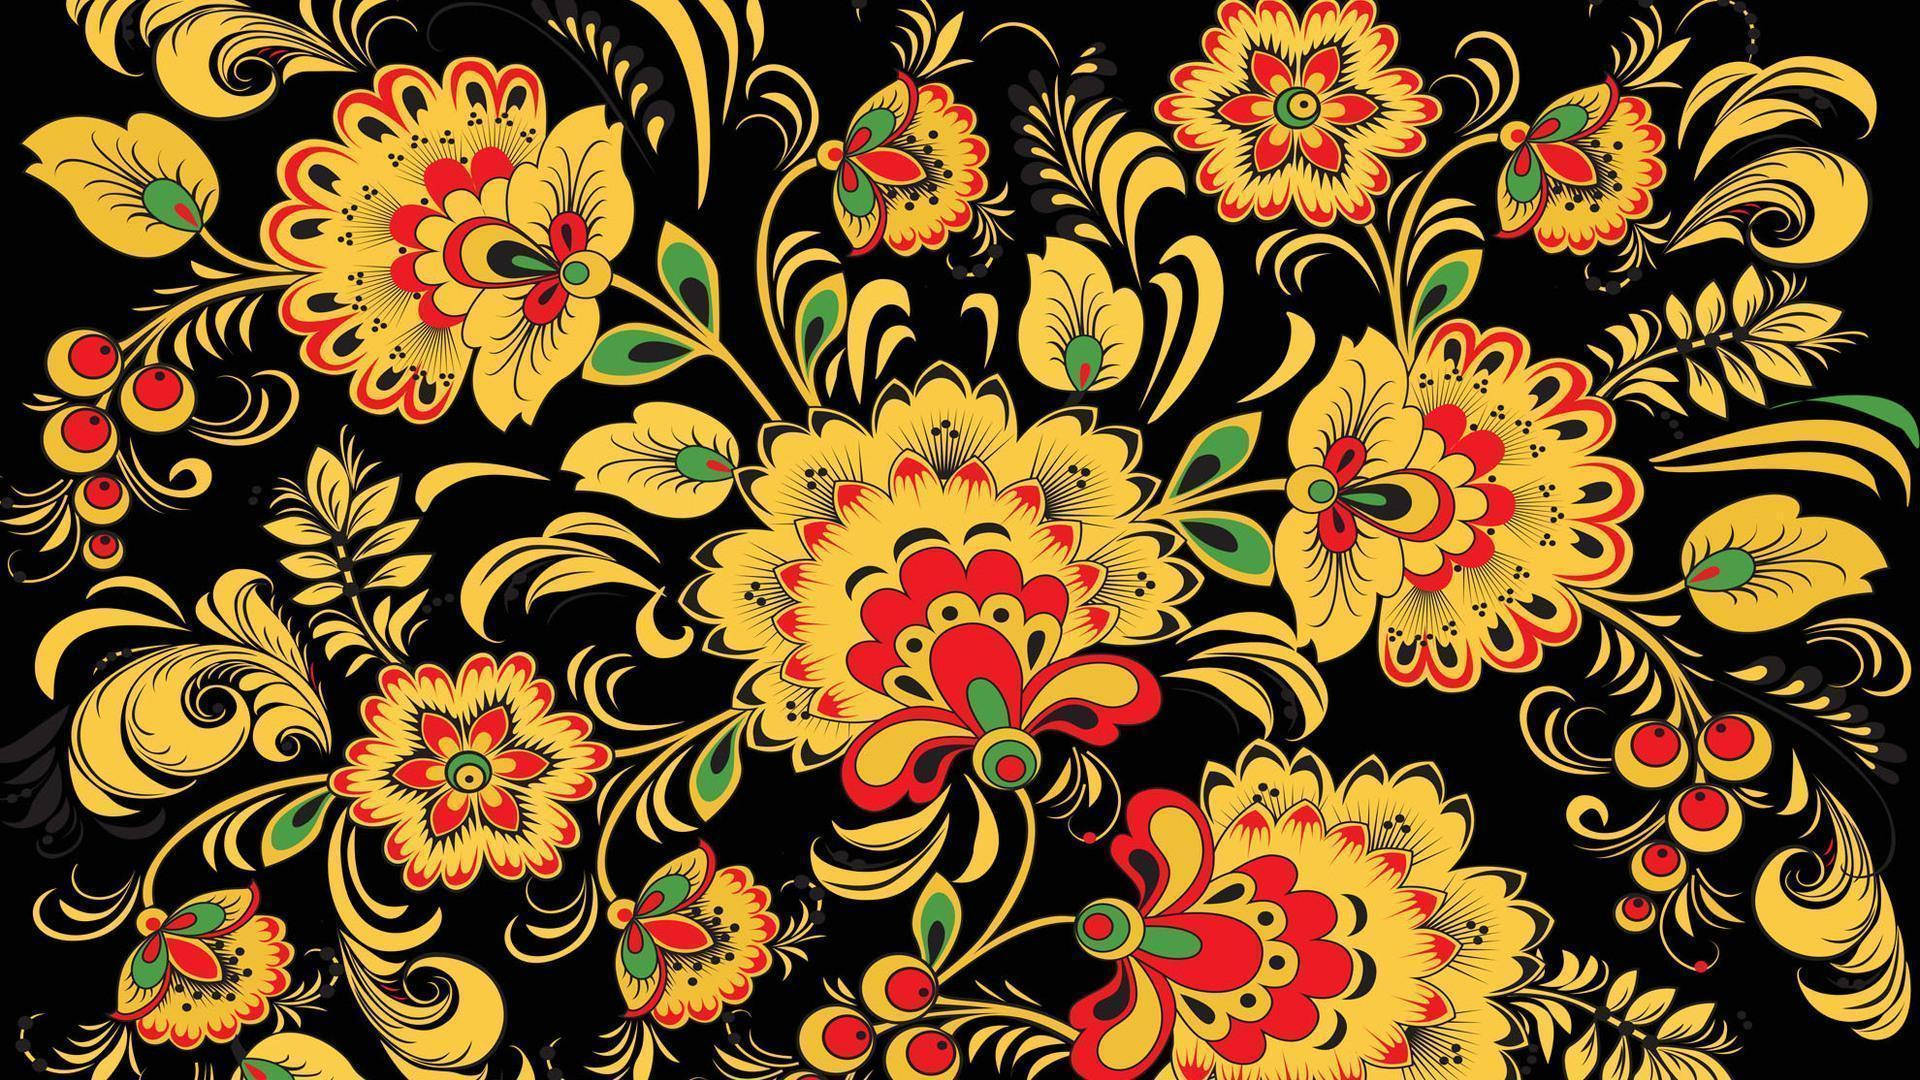 Authentic Russian Yellow Flowered Folk Art Display Background